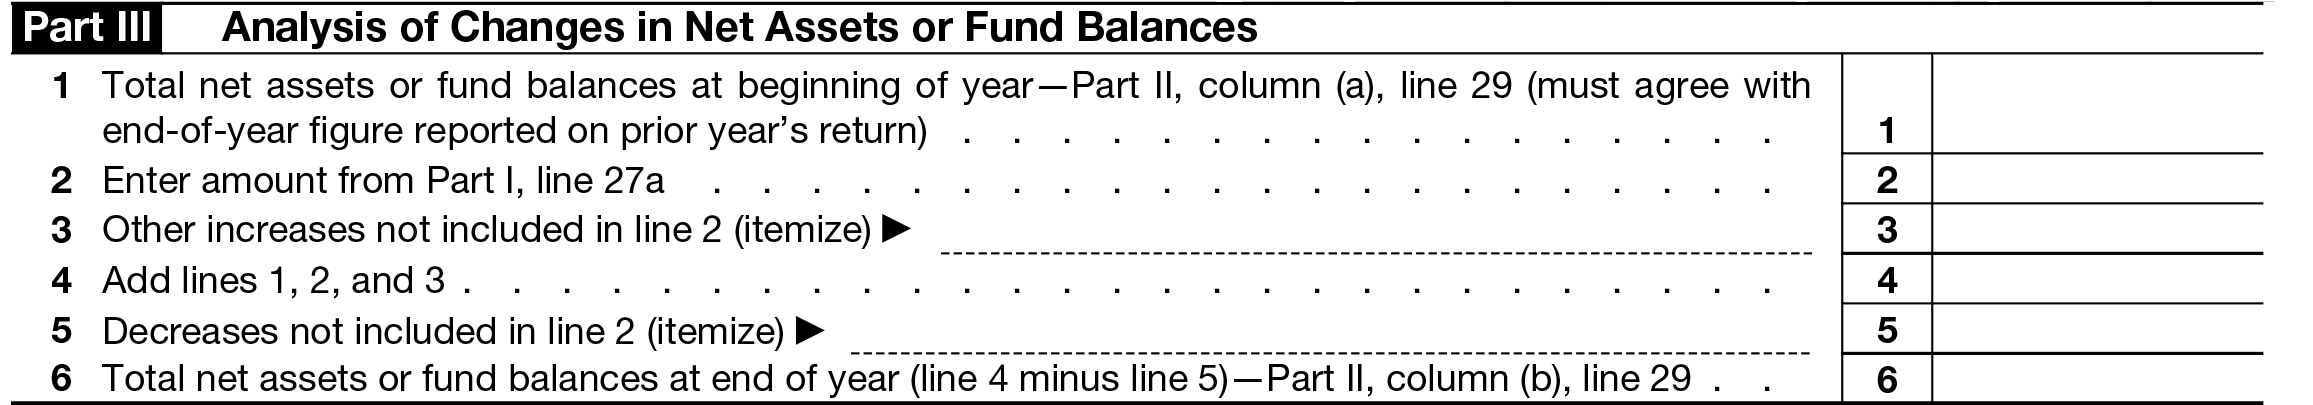 Part III - Analysis of Changes in Net Assets or Fund Balances